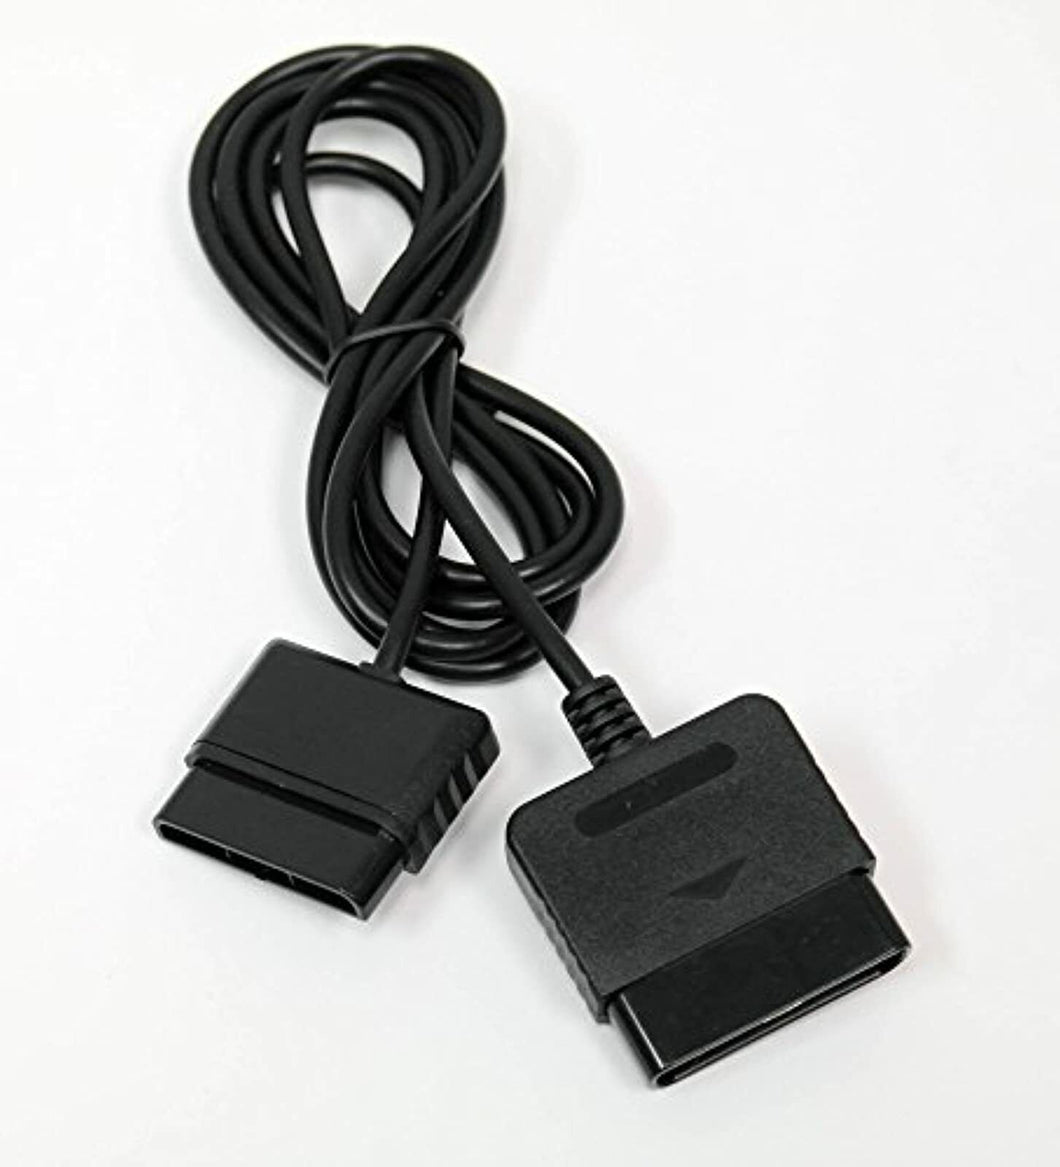 EXTENSION CABLE FOR SONY PLAYSTATION 2 CONTROLLER